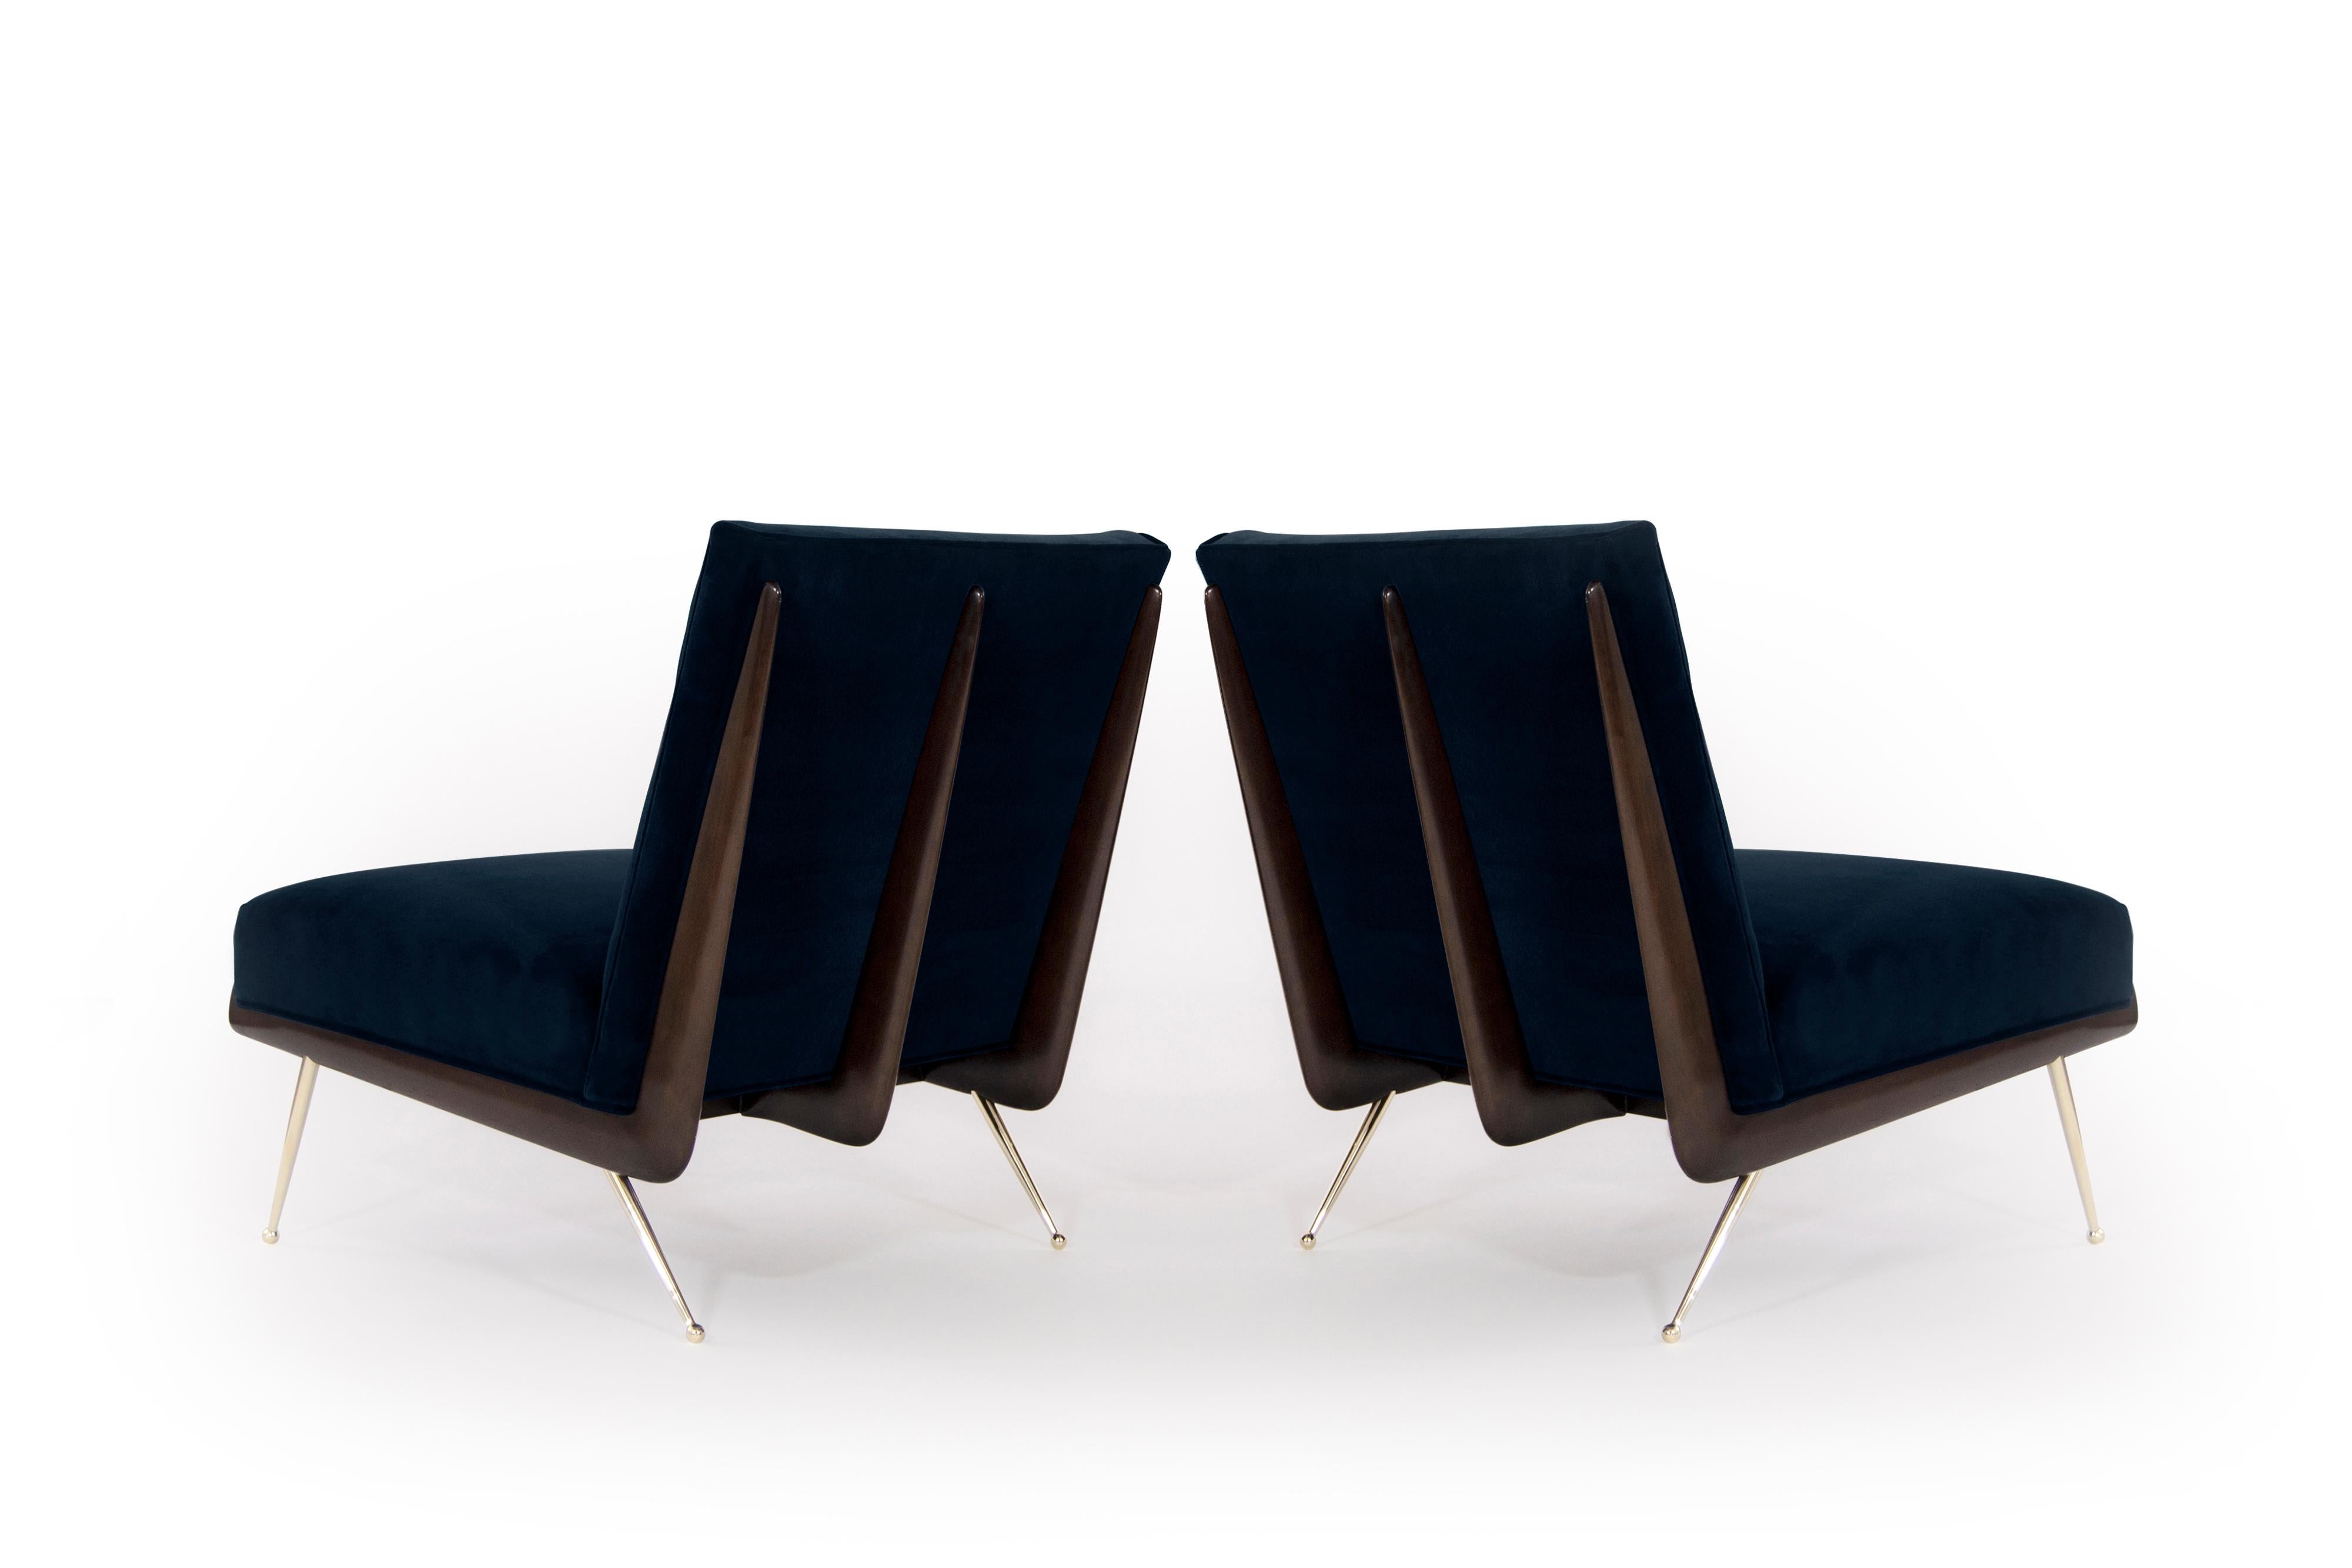 A phenomenal pair of lounge chairs, circa 1950s.

Boomerang shaped walnut frames fully restored to their original finish, newly upholstered in deep blue mohair. Thin tapered brass legs newly polished.